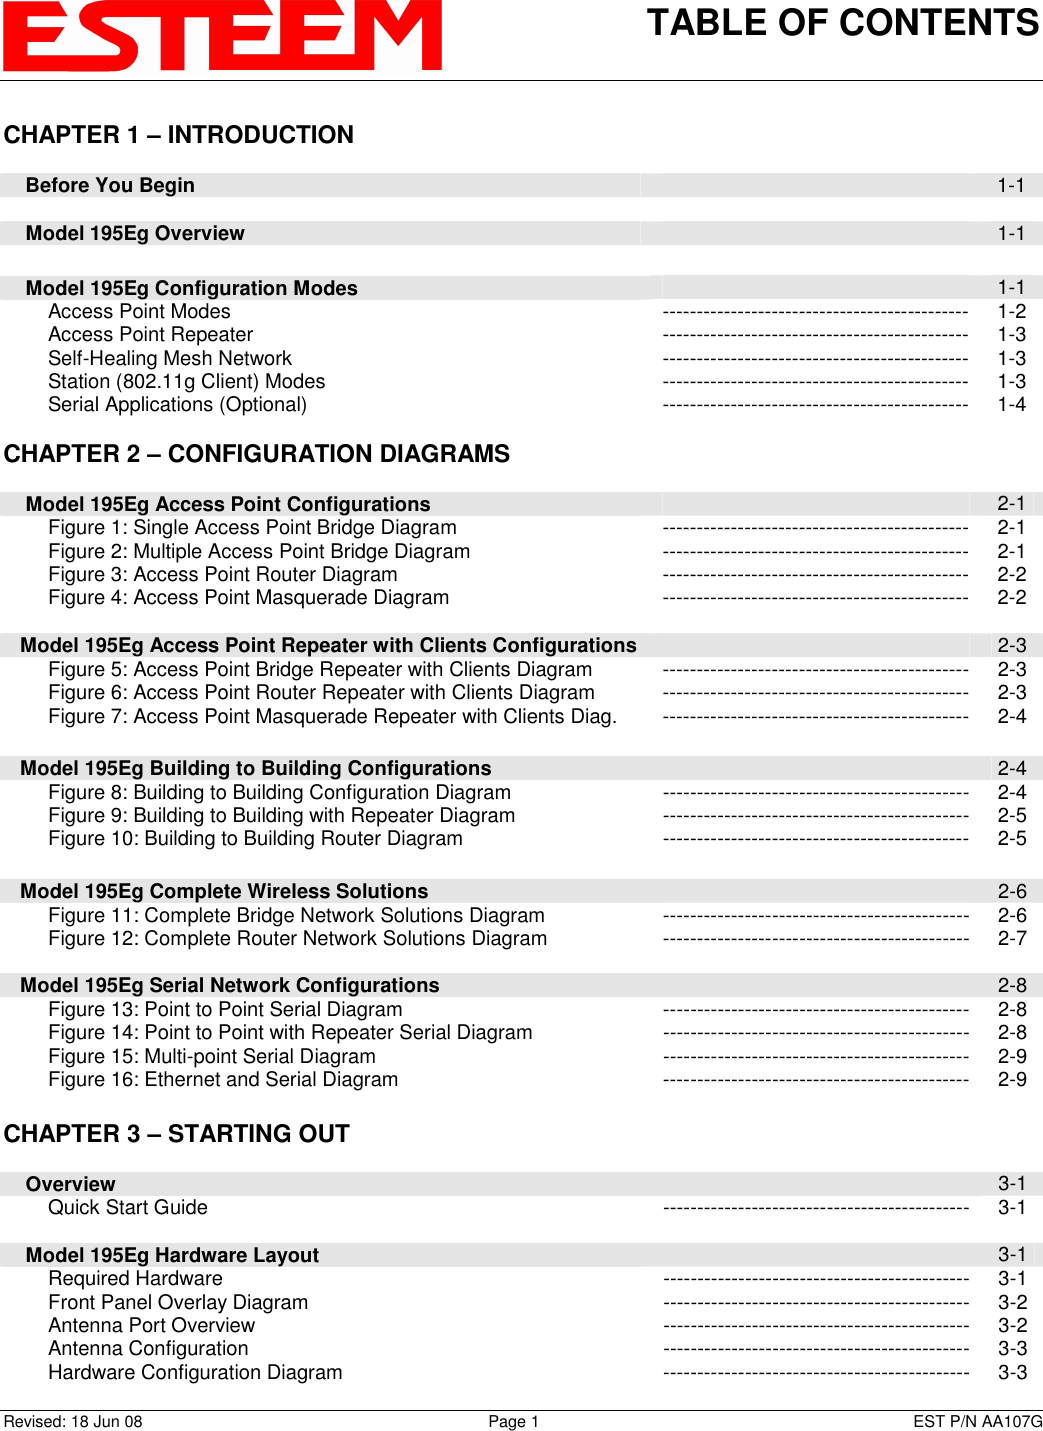 TABLE OF CONTENTS    Revised: 18 Jun 08  Page 1  EST P/N AA107G CHAPTER 1 – INTRODUCTION      Before You Begin   1-1      Model 195Eg Overview   1-1         Model 195Eg Configuration Modes   1-1         Access Point Modes  --------------------------------------------- 1-2         Access Point Repeater  --------------------------------------------- 1-3         Self-Healing Mesh Network  --------------------------------------------- 1-3         Station (802.11g Client) Modes  --------------------------------------------- 1-3         Serial Applications (Optional)  --------------------------------------------- 1-4      CHAPTER 2 – CONFIGURATION DIAGRAMS             Model 195Eg Access Point Configurations   2-1         Figure 1: Single Access Point Bridge Diagram  --------------------------------------------- 2-1         Figure 2: Multiple Access Point Bridge Diagram  --------------------------------------------- 2-1         Figure 3: Access Point Router Diagram  --------------------------------------------- 2-2         Figure 4: Access Point Masquerade Diagram  --------------------------------------------- 2-2        Model 195Eg Access Point Repeater with Clients Configurations   2-3         Figure 5: Access Point Bridge Repeater with Clients Diagram  --------------------------------------------- 2-3         Figure 6: Access Point Router Repeater with Clients Diagram  --------------------------------------------- 2-3         Figure 7: Access Point Masquerade Repeater with Clients Diag.  --------------------------------------------- 2-4        Model 195Eg Building to Building Configurations   2-4         Figure 8: Building to Building Configuration Diagram  --------------------------------------------- 2-4         Figure 9: Building to Building with Repeater Diagram  --------------------------------------------- 2-5         Figure 10: Building to Building Router Diagram  --------------------------------------------- 2-5        Model 195Eg Complete Wireless Solutions   2-6         Figure 11: Complete Bridge Network Solutions Diagram  --------------------------------------------- 2-6         Figure 12: Complete Router Network Solutions Diagram  --------------------------------------------- 2-7         Model 195Eg Serial Network Configurations   2-8         Figure 13: Point to Point Serial Diagram  --------------------------------------------- 2-8         Figure 14: Point to Point with Repeater Serial Diagram  --------------------------------------------- 2-8         Figure 15: Multi-point Serial Diagram  --------------------------------------------- 2-9         Figure 16: Ethernet and Serial Diagram  --------------------------------------------- 2-9     CHAPTER 3 – STARTING OUT             Overview   3-1         Quick Start Guide  --------------------------------------------- 3-1          Model 195Eg Hardware Layout   3-1         Required Hardware  --------------------------------------------- 3-1         Front Panel Overlay Diagram  --------------------------------------------- 3-2         Antenna Port Overview  --------------------------------------------- 3-2         Antenna Configuration  --------------------------------------------- 3-3         Hardware Configuration Diagram  --------------------------------------------- 3-3 